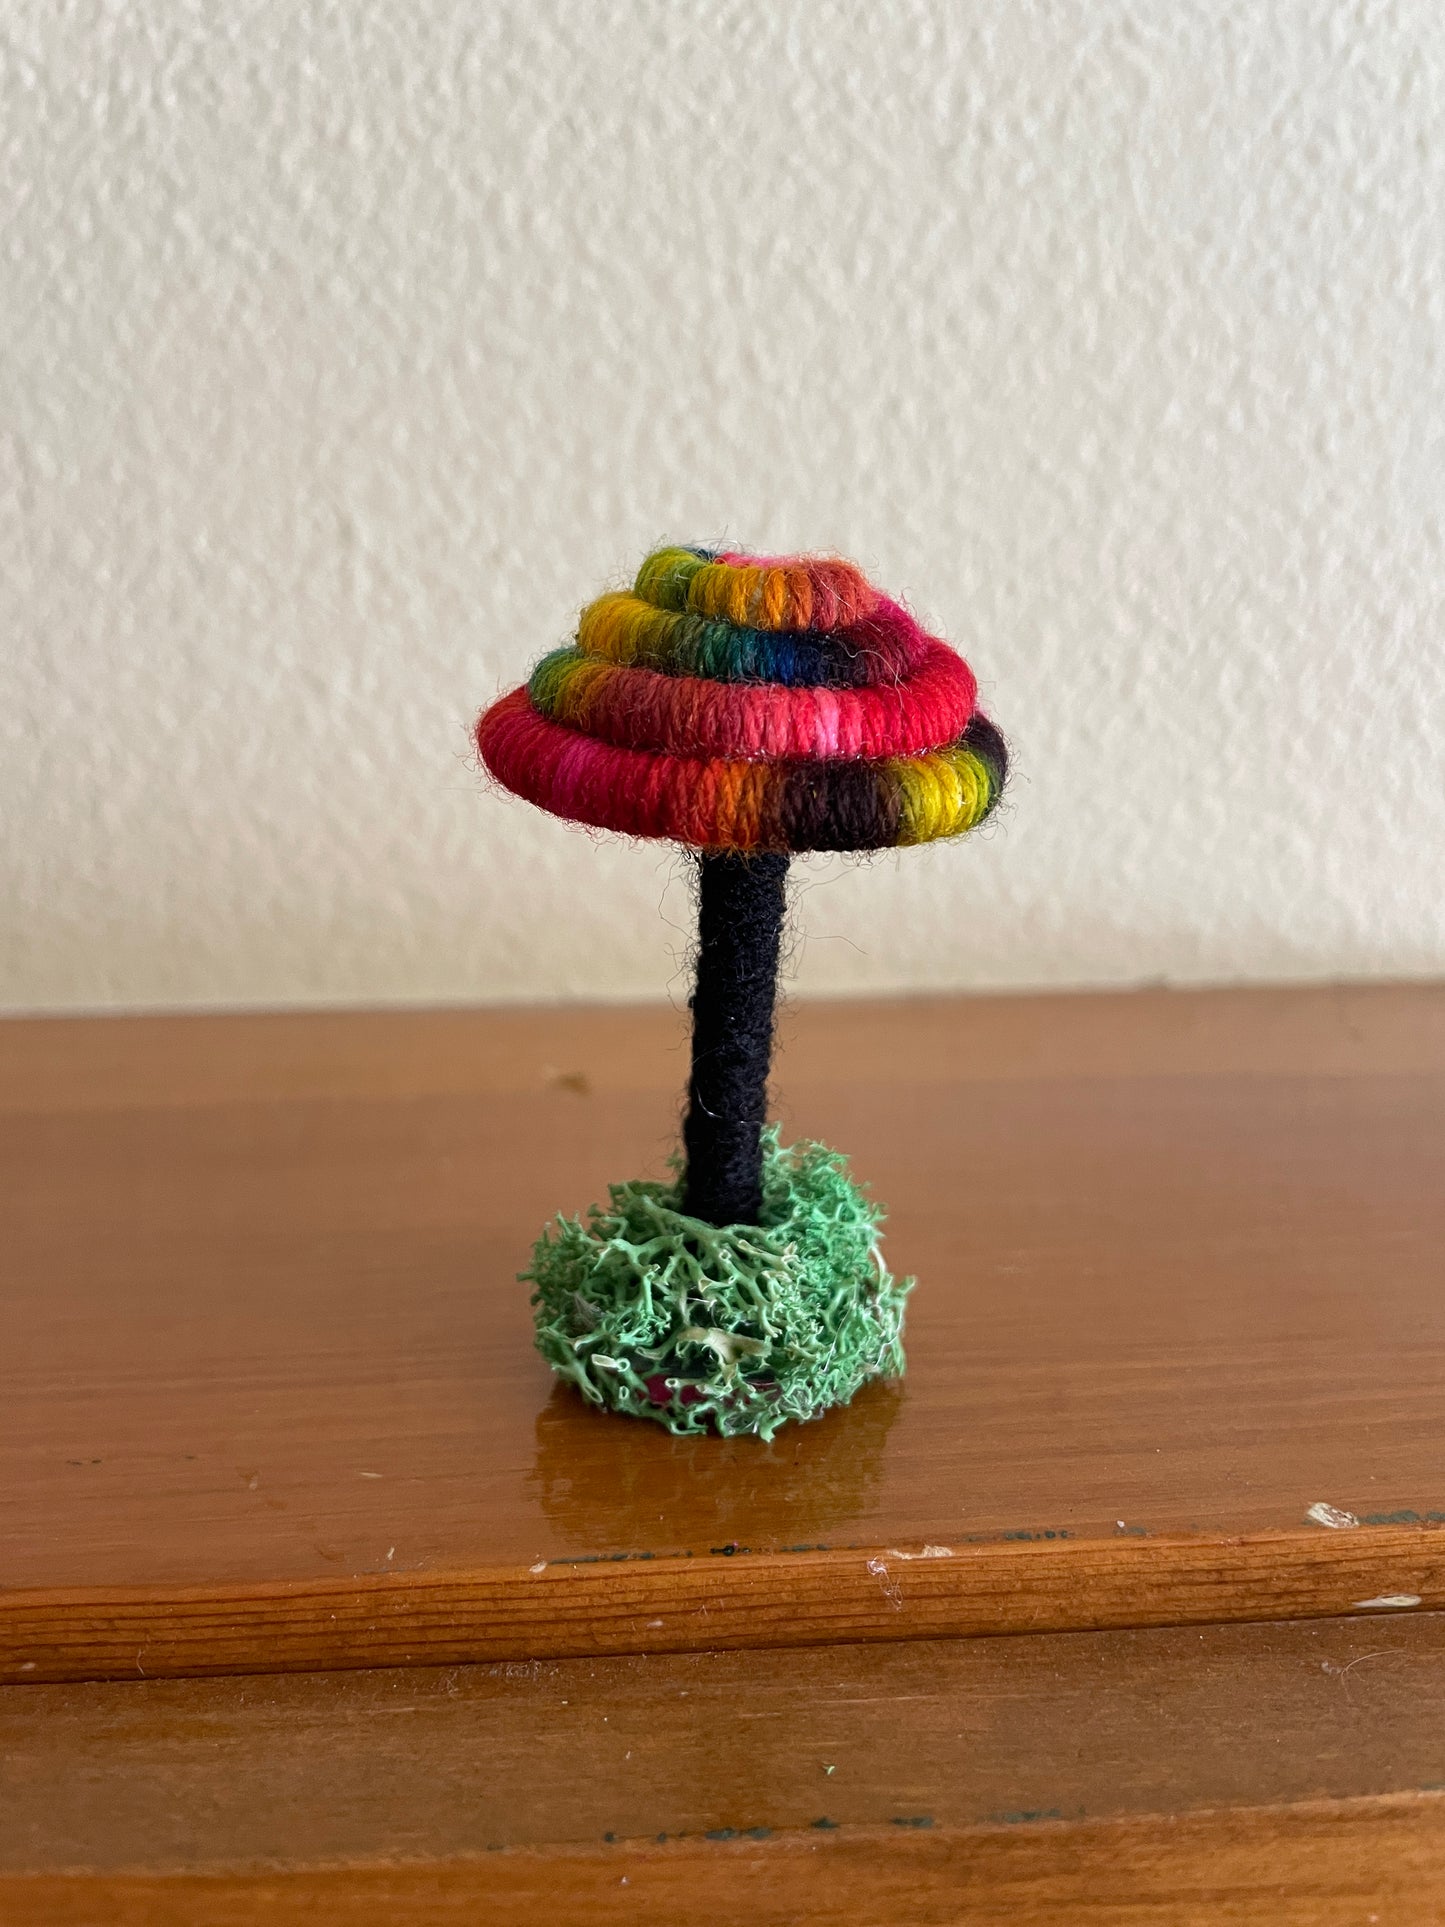 tie dye mirror Made with bright multicolored yarn wrapped around rope and shaped into a mushroom with small flat platform for standing, perfect for mushroom lovers and or collectors, can also be used as an ornament (hook is included in order)  Materials: acrylic yarn, rope, hot glue  Dimensions: